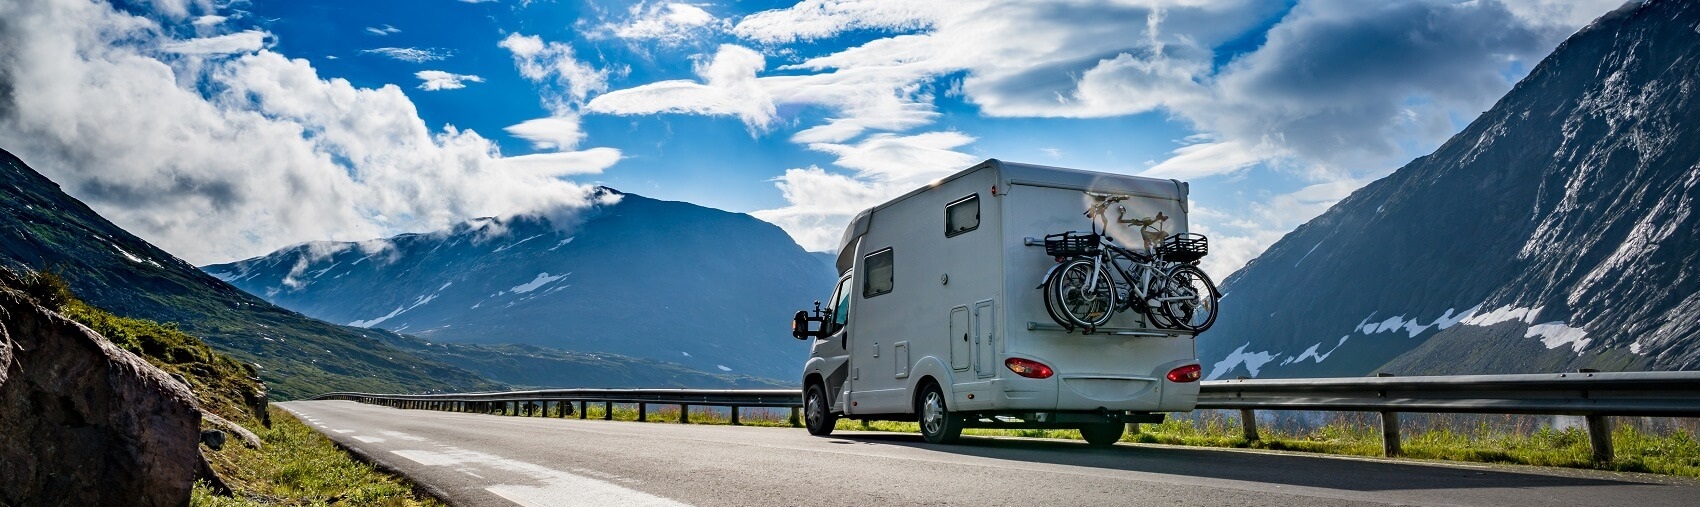 RV driving on the highway with mountains in the background